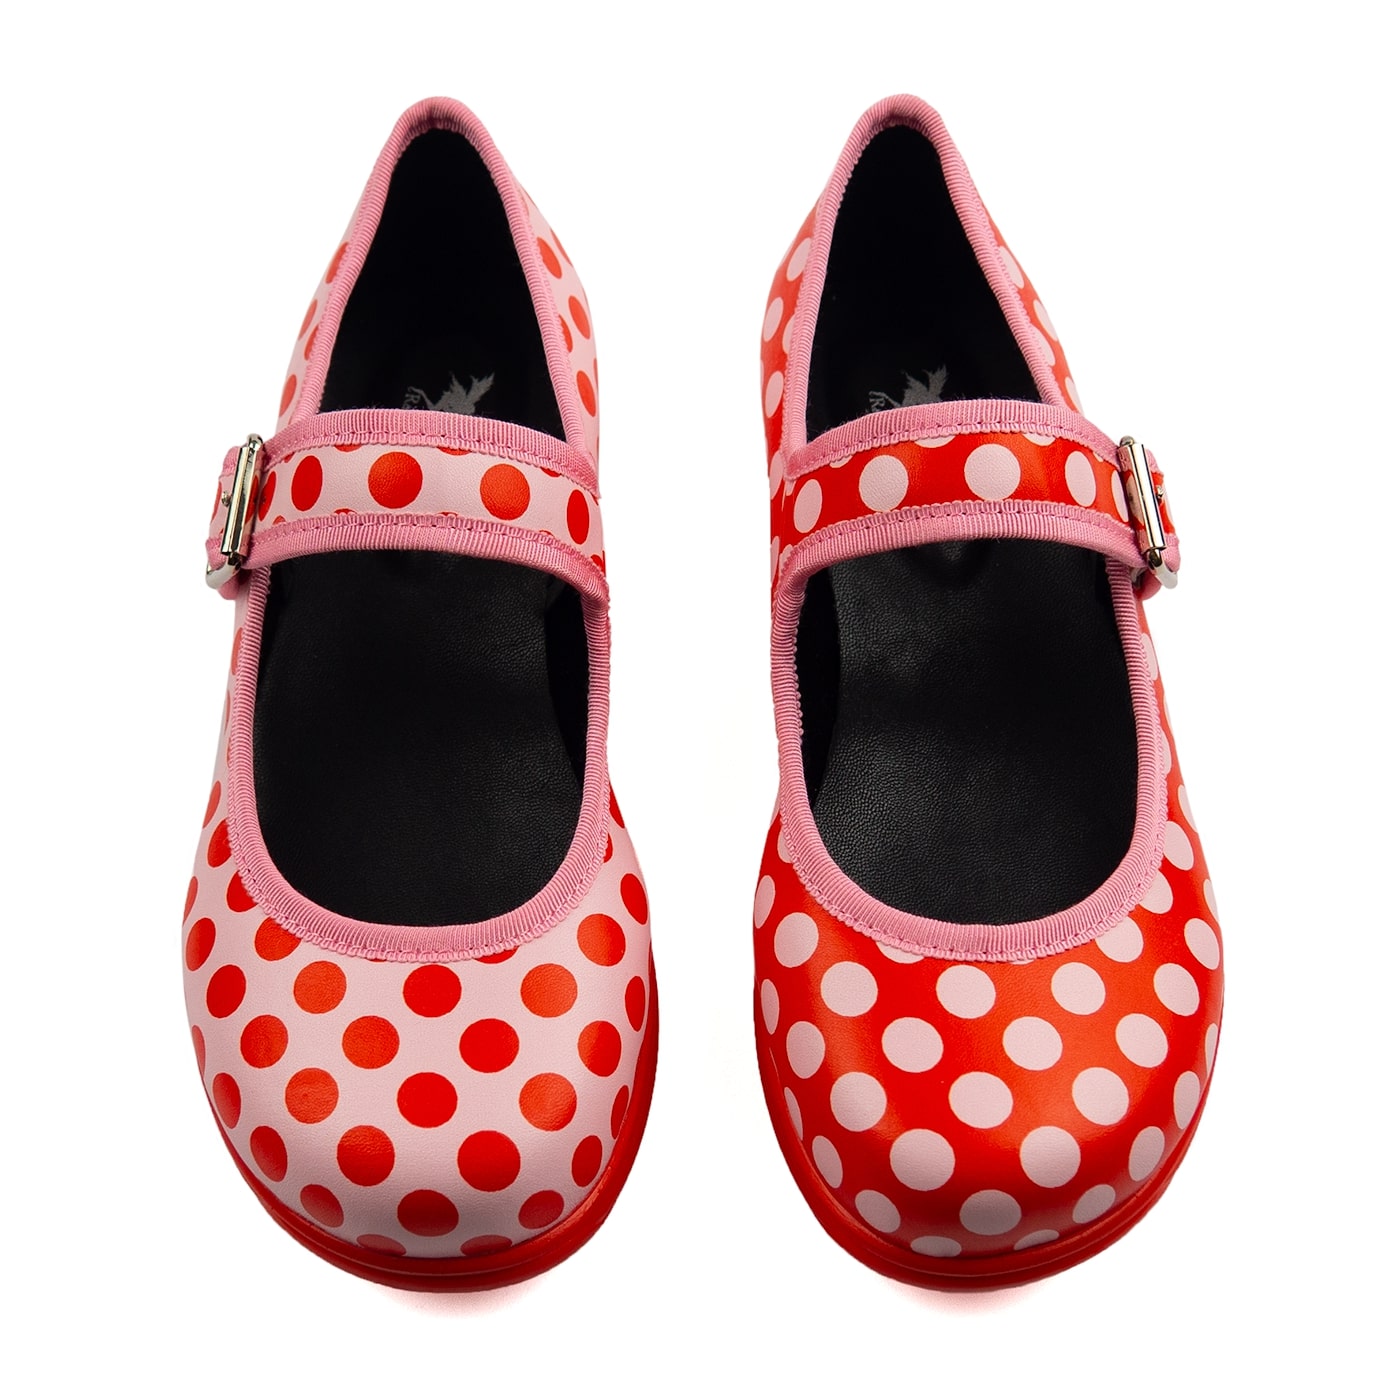 Blush Mary Janes by RainbowsAndFairies.com (Red Polka - Pink Polka - Minnie Mouse - Mismatched Shoes - Buckle Up Shoes - Cute Shoes) - SKU: FW_MARYJ_BLUSH_ORG - Pic 02